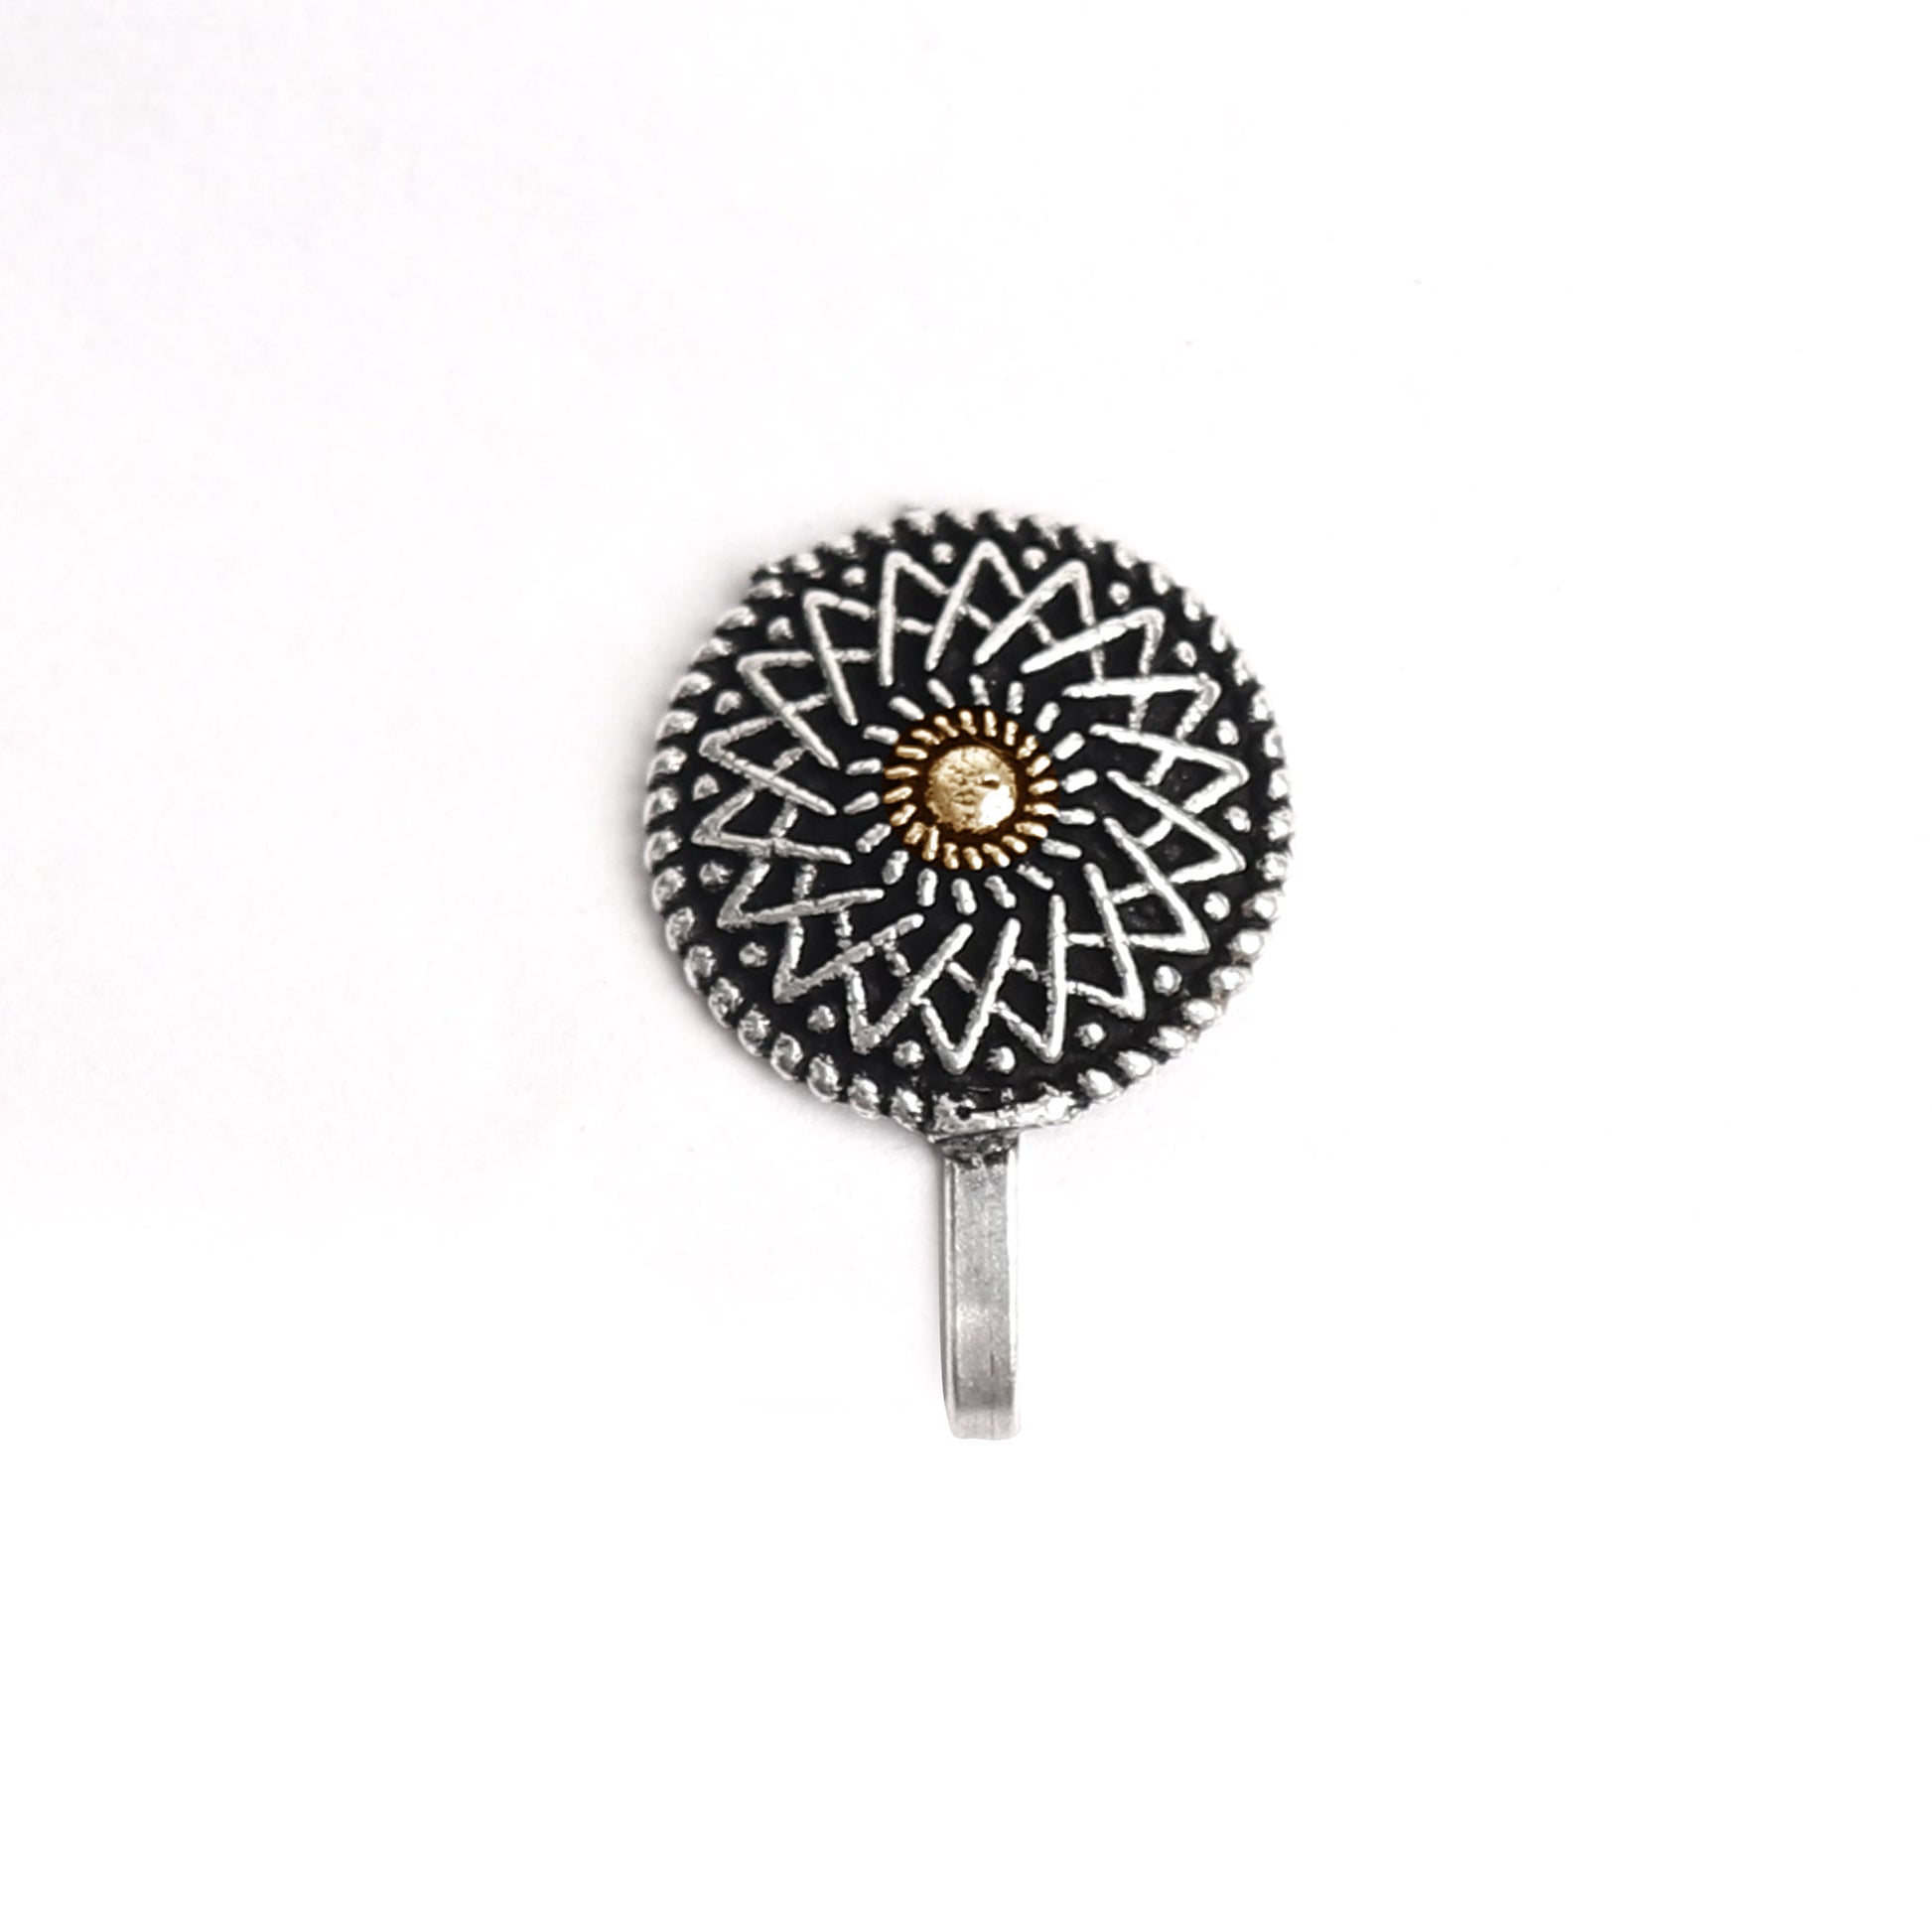 Nose Pin,Shield Style Round Nose Pin - Cippele Multi Store